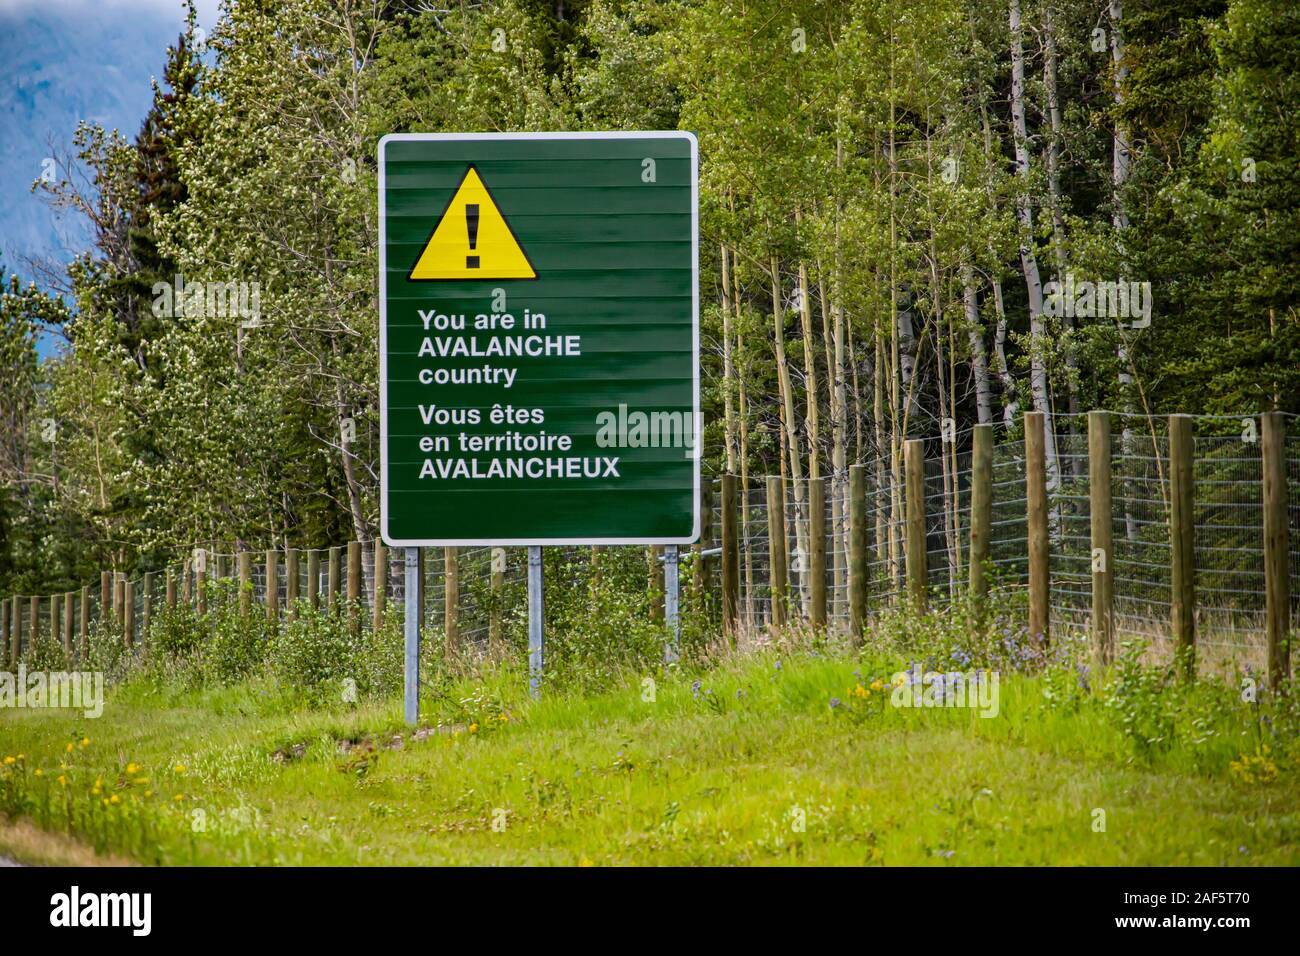 two languages French and English Information road Bilingual green sign on roadside, you are in avalanche country with Yellow warning triangle symbol Stock Photo